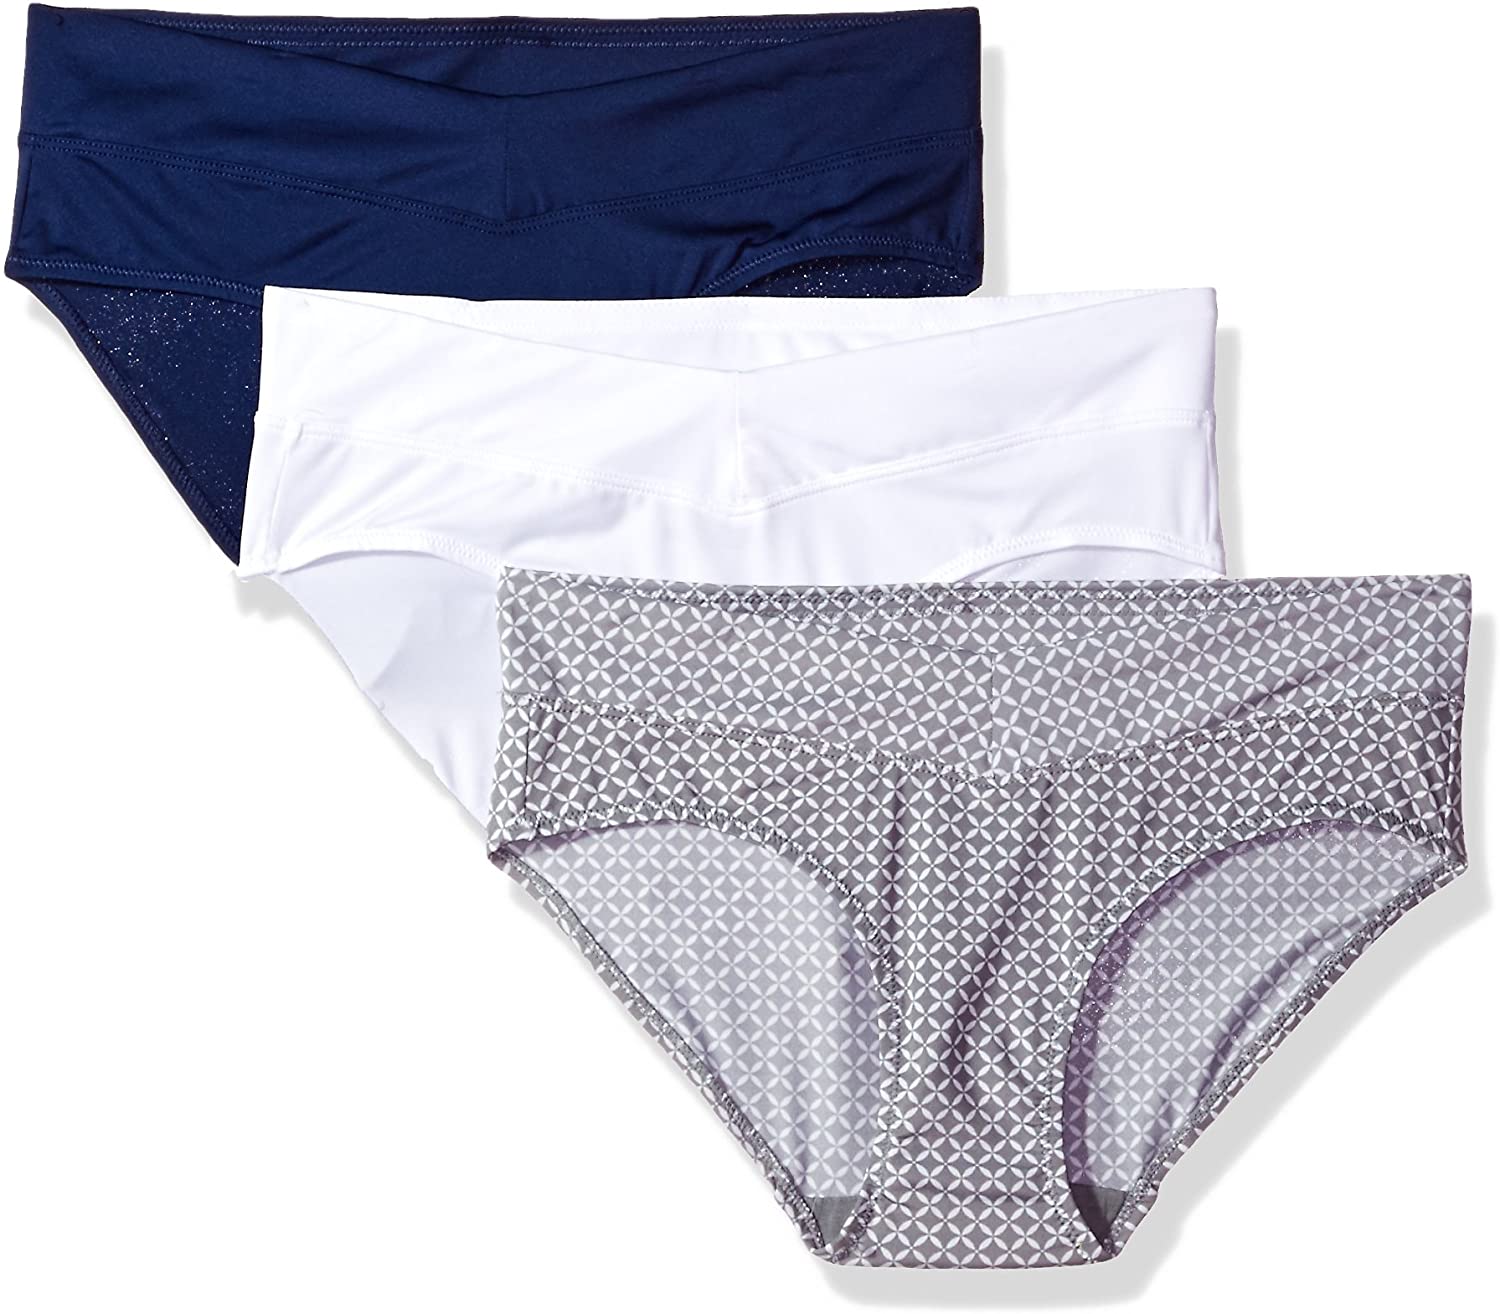 Buy Blissful Benefits by Warner's Women's No Muffin Top w/ Lace Hipster,  3-Pack online